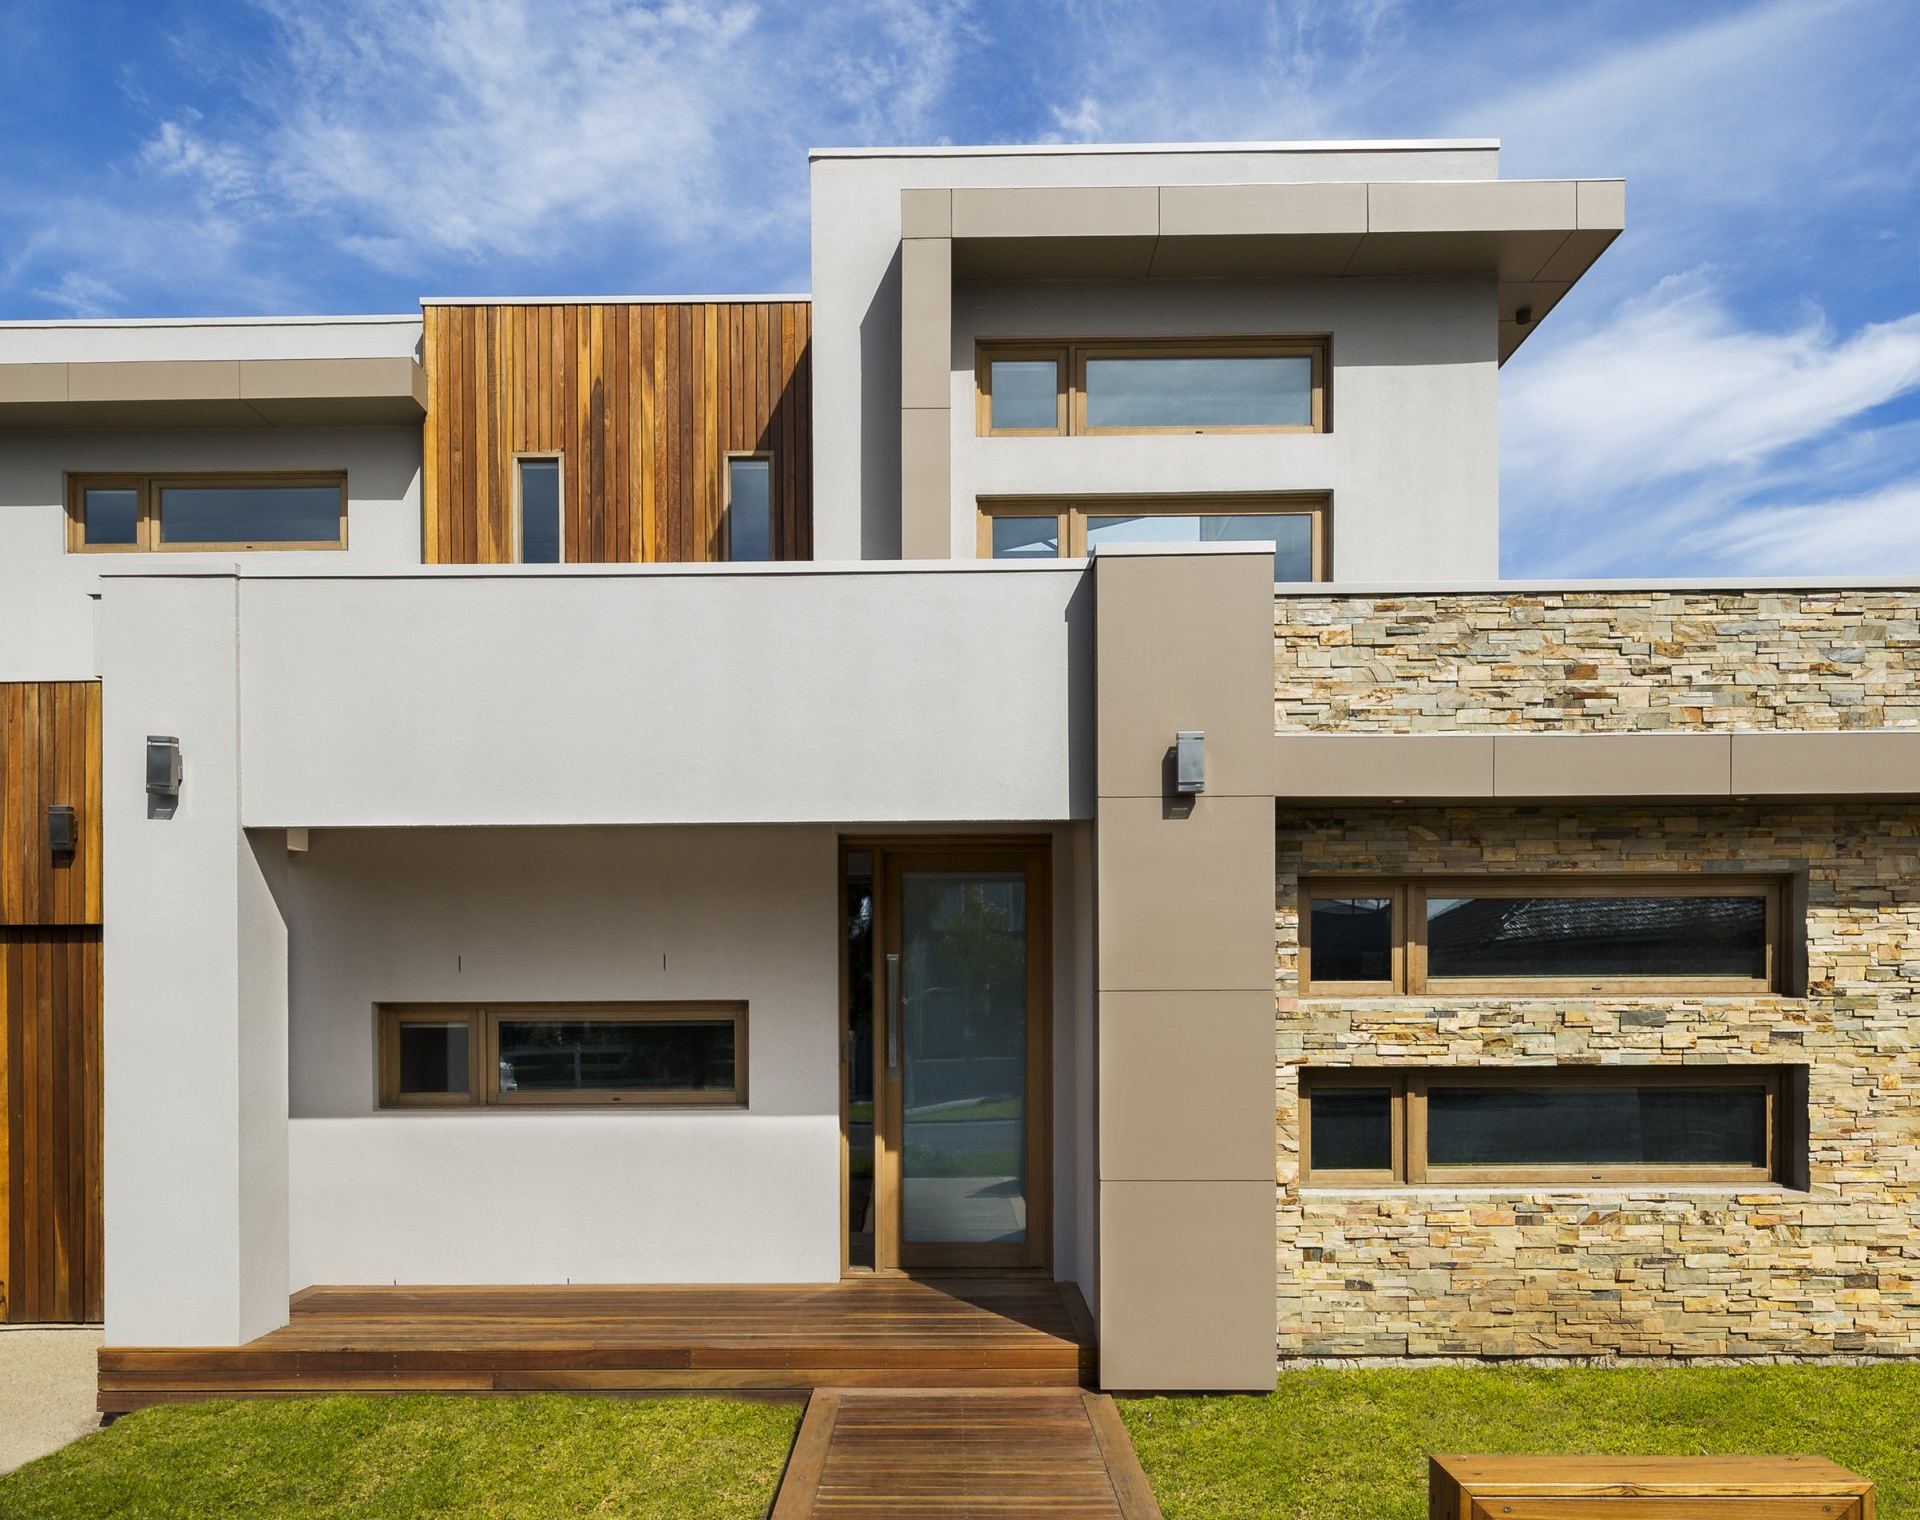 Why Choose Lightweight Cladding for Home Exteriors